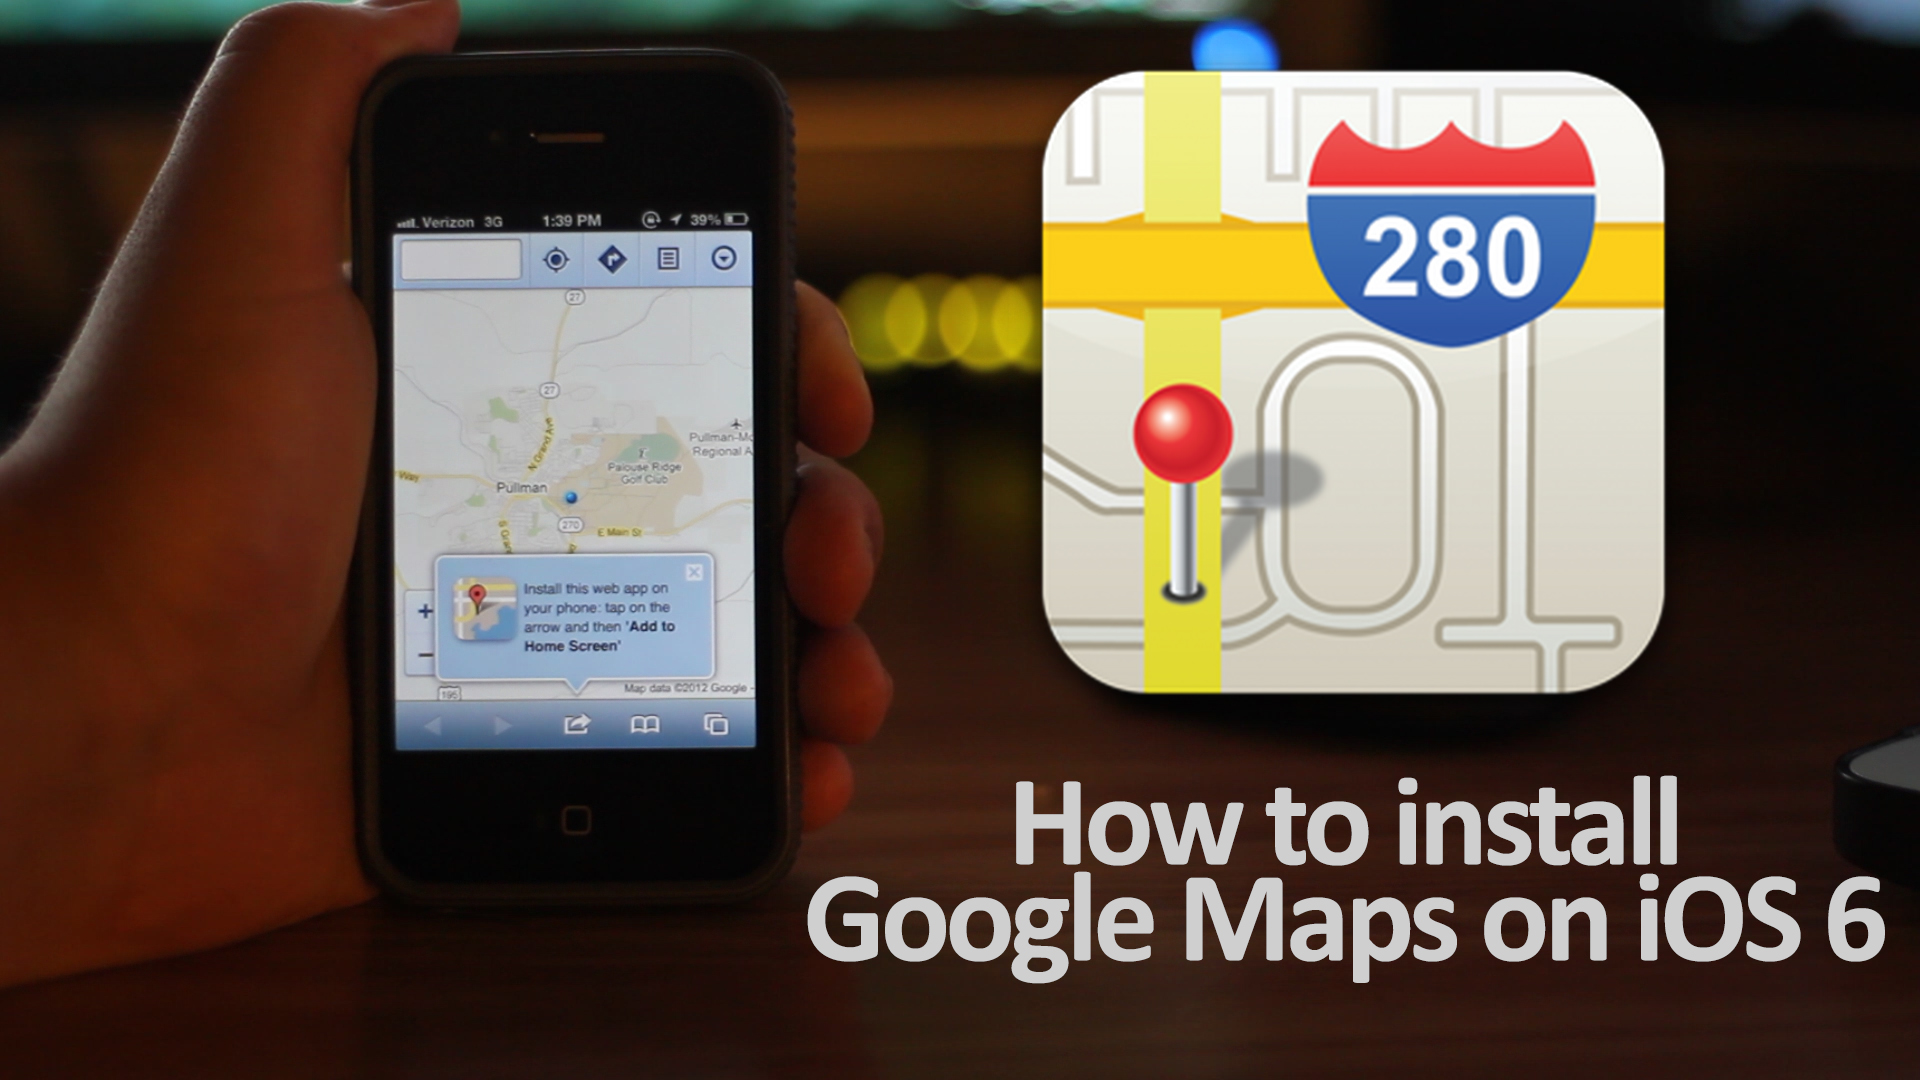 How to Install Google Maps on Your iPhone and iPad in iOS 6